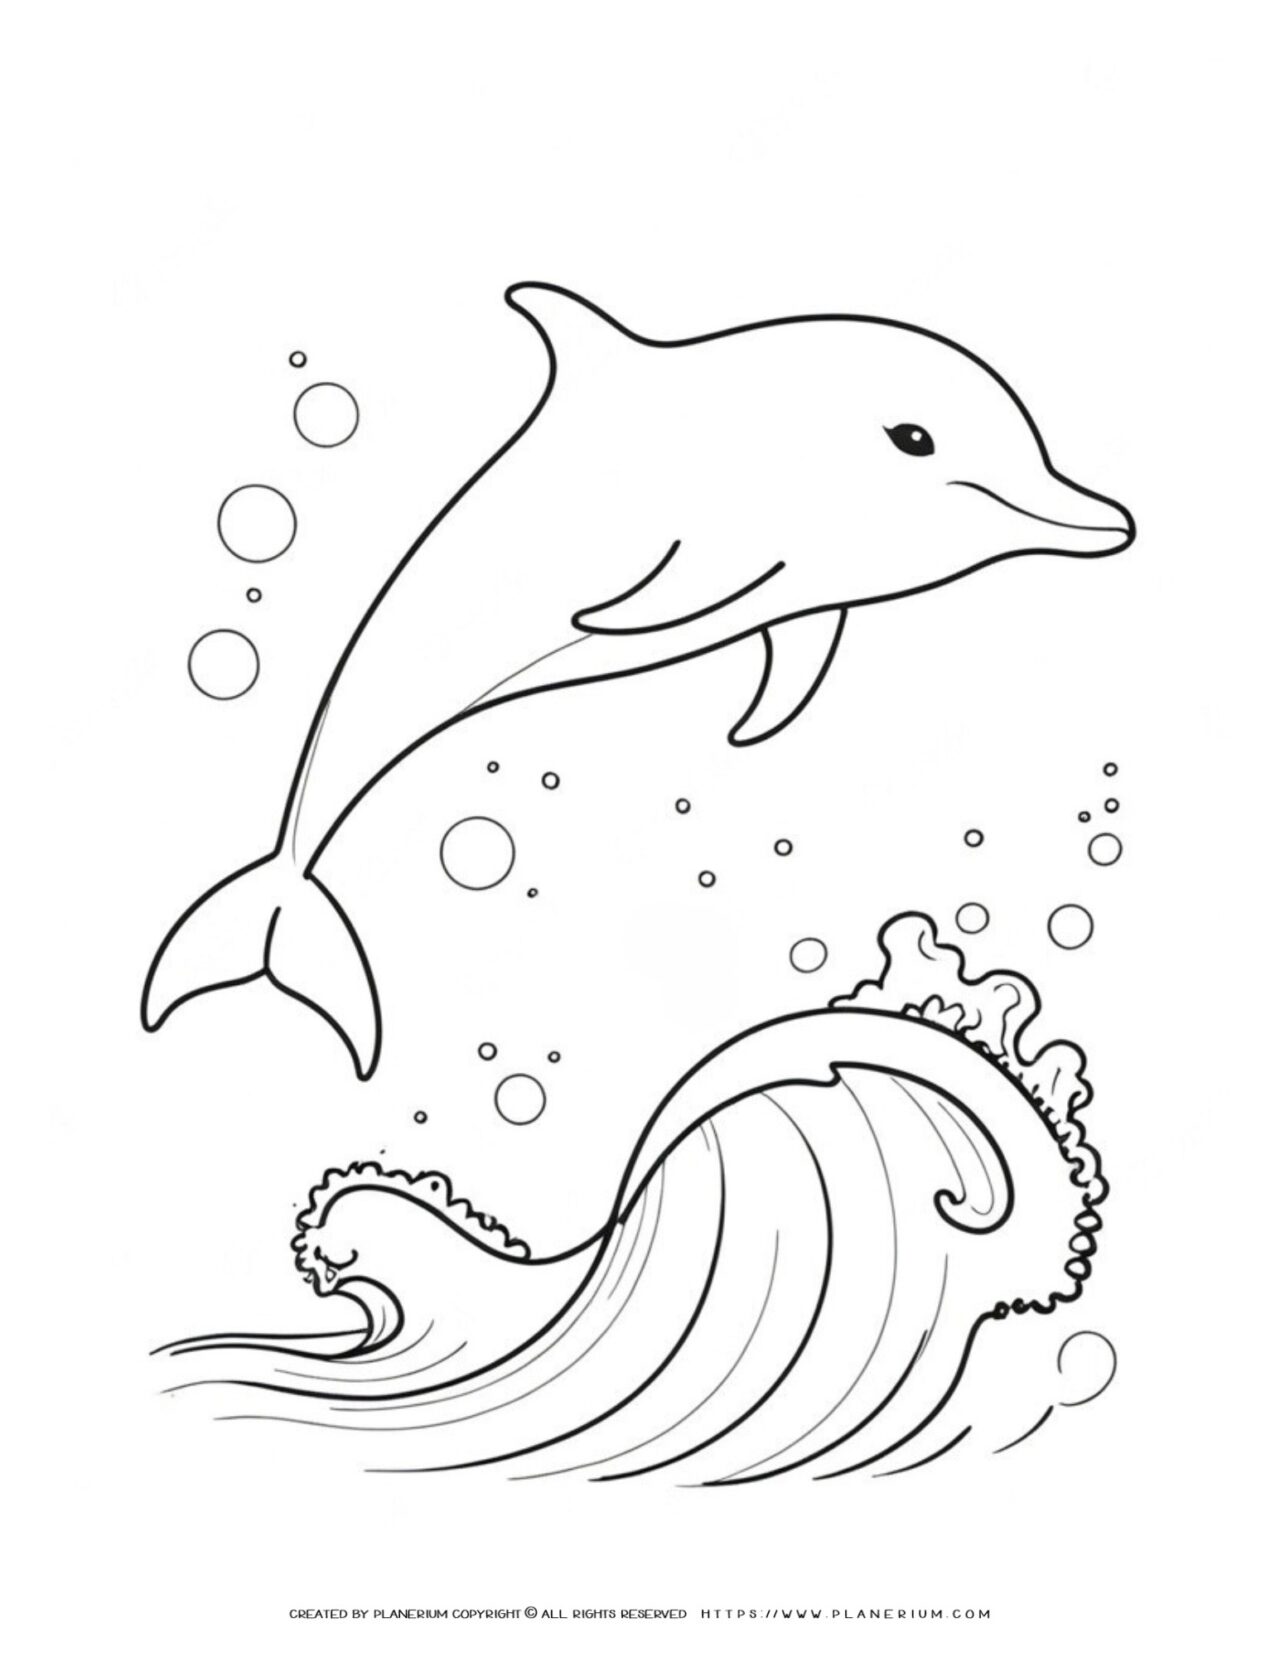 Dolphin-jumping-over-wave-coloring-page